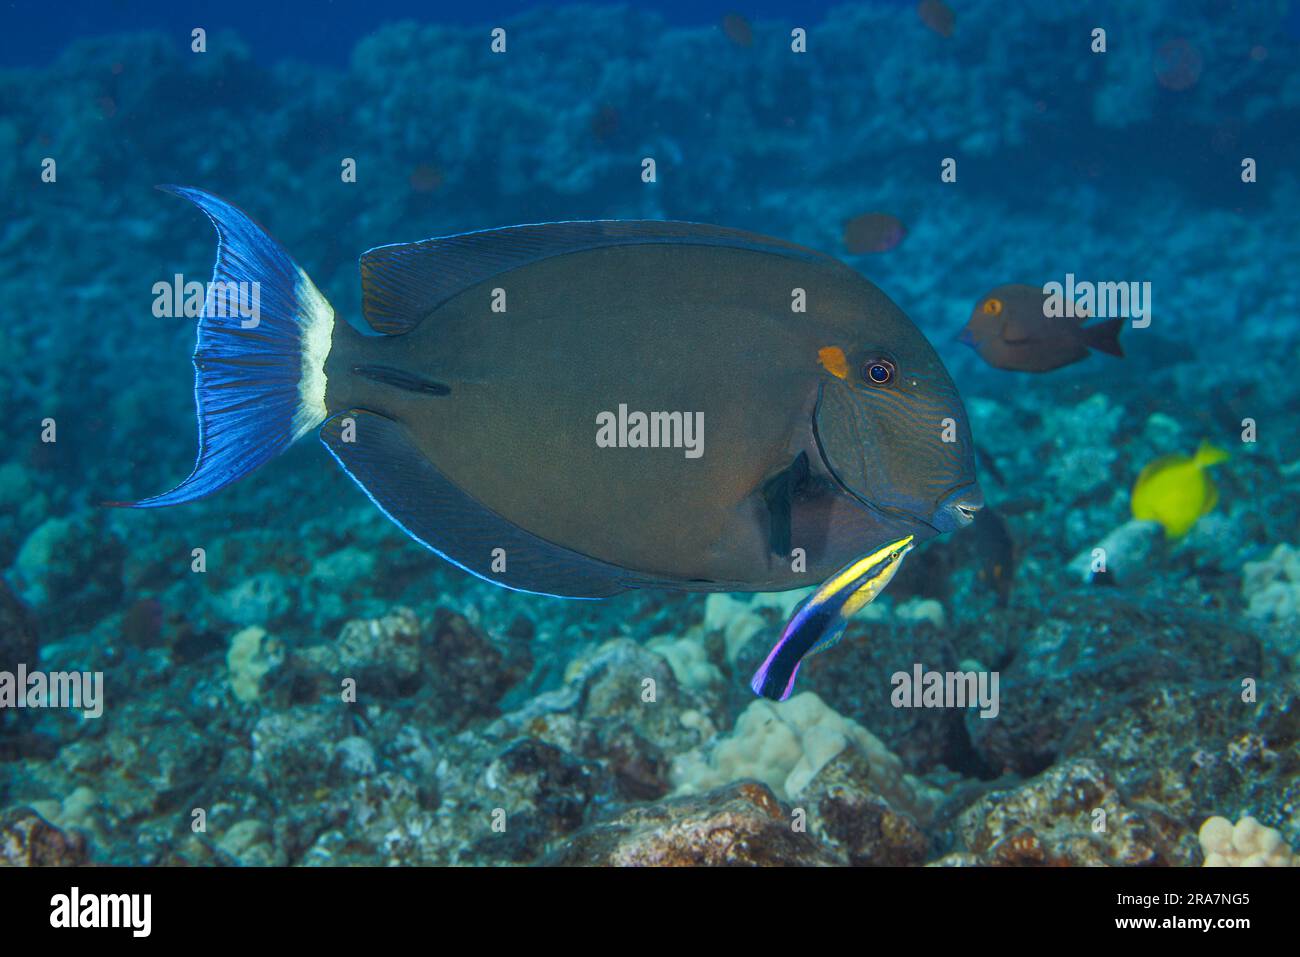 The ringtail surgeonfish, Acanthurus blochii, can often be found in large schools, Hawaii. This individual is being examined by the endemic Hawaiian c Stock Photo